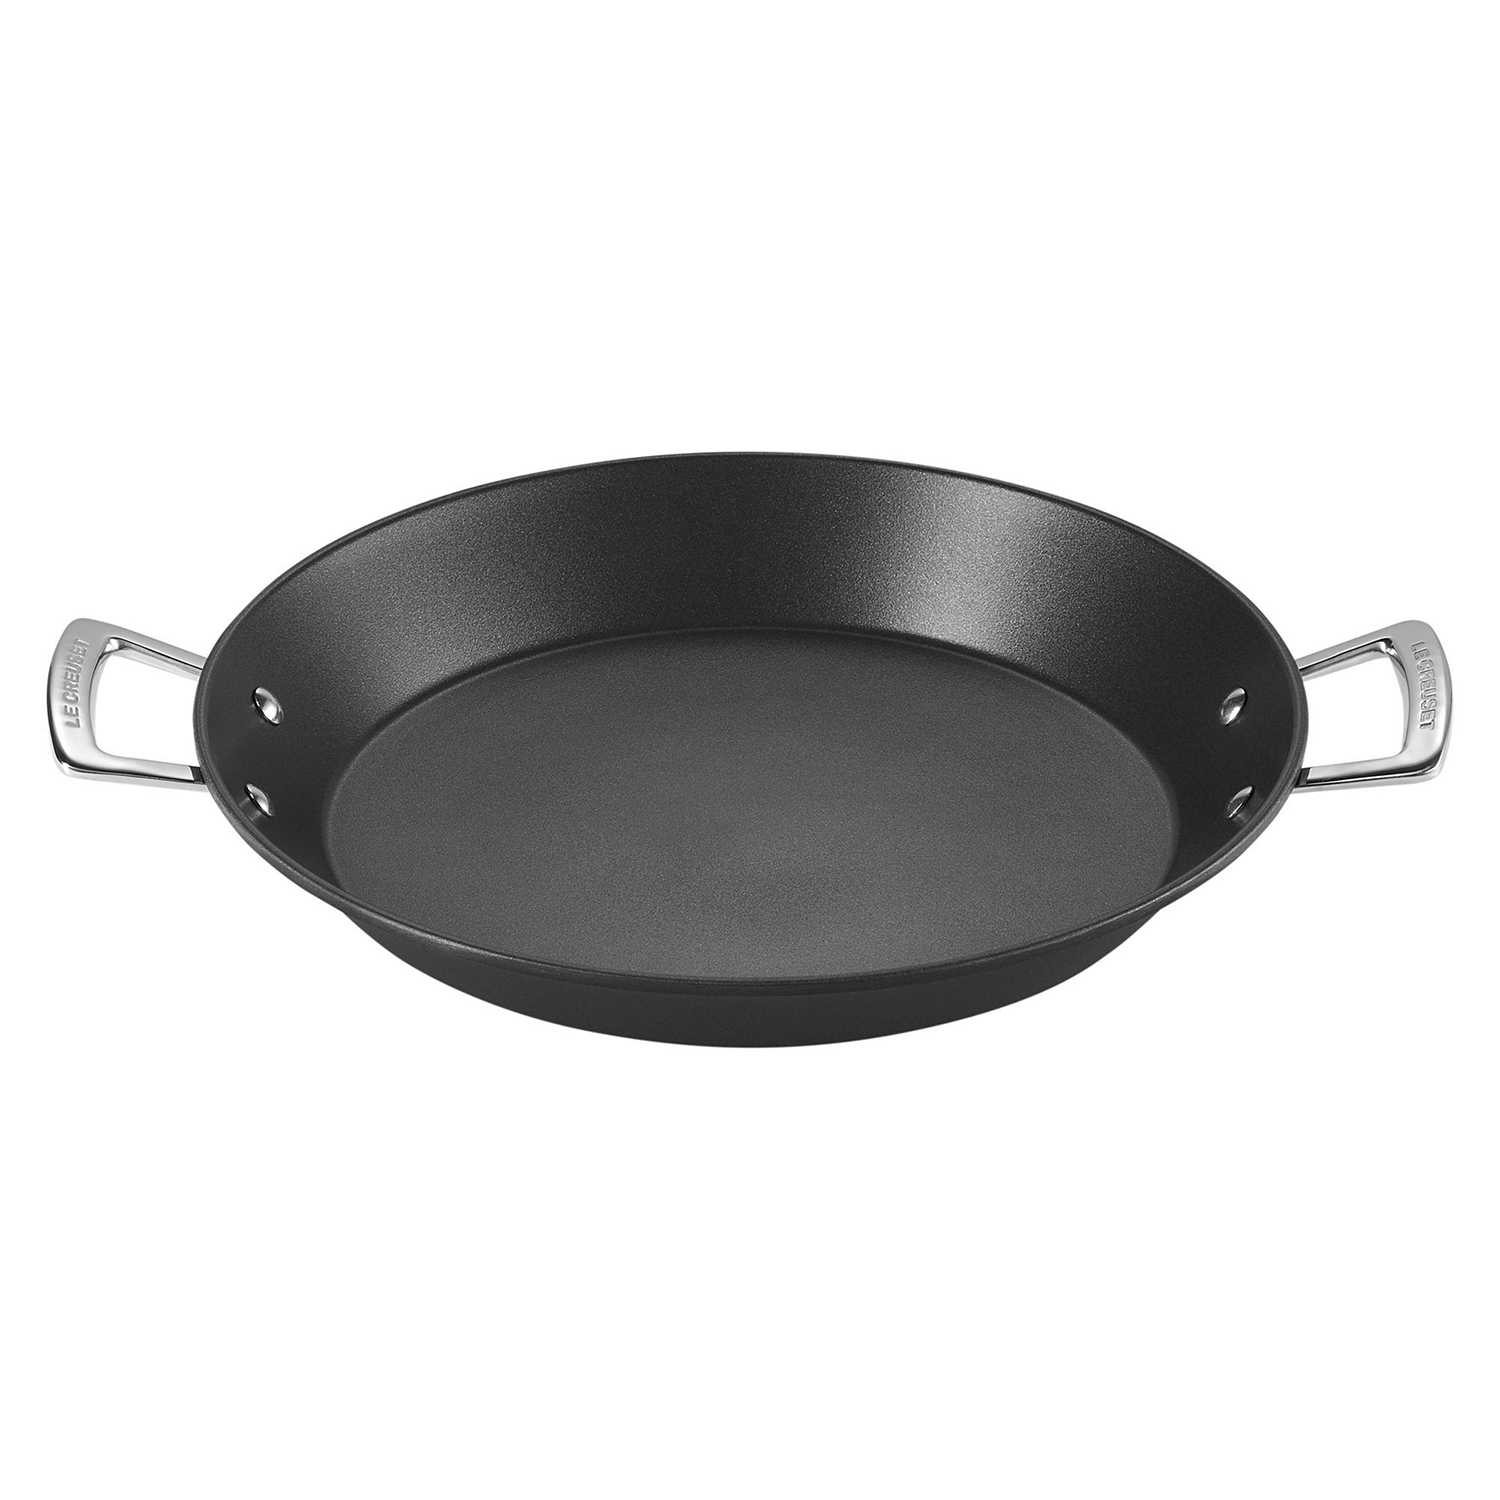 Le Creuset - Paella Pan 32 cm - Non-Stick - For an authentic and